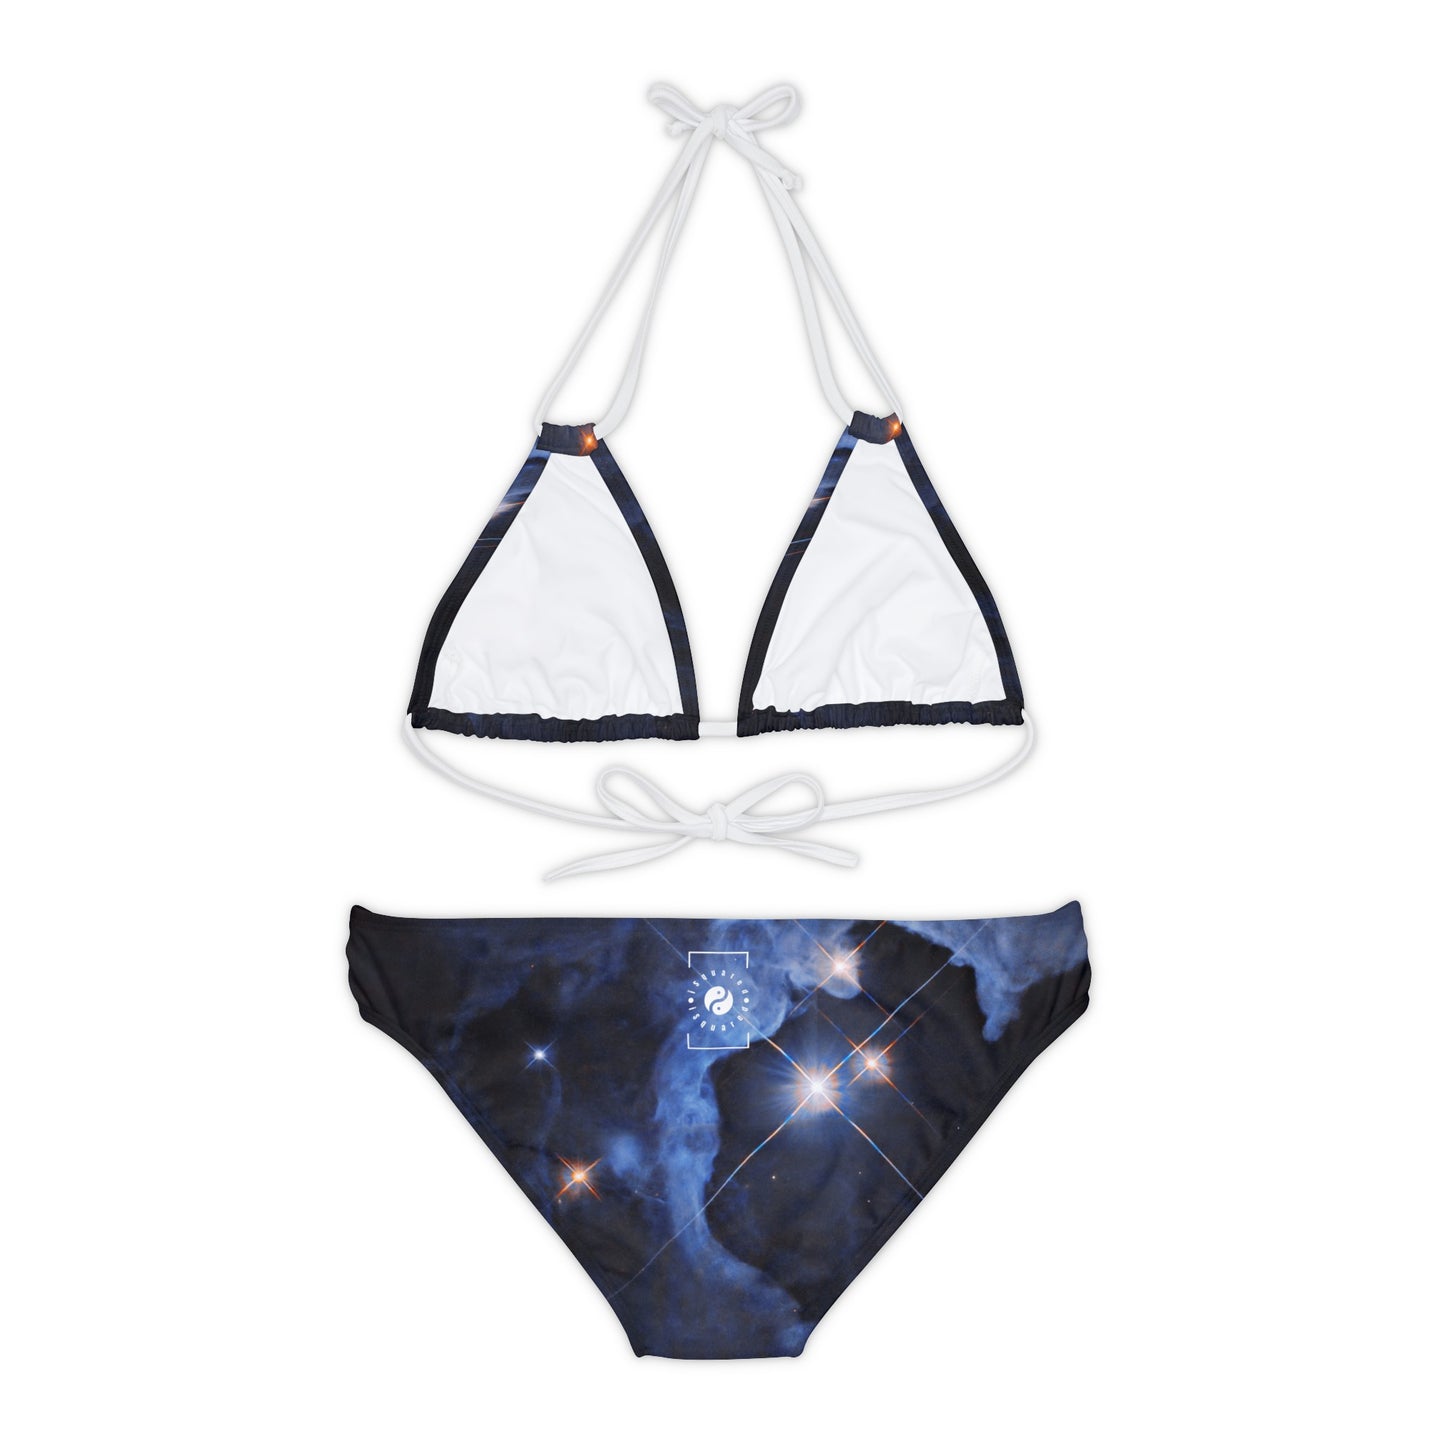 HP Tau, HP Tau G2, and G3 3 star system captured by Hubble - Lace-up Bikini Set